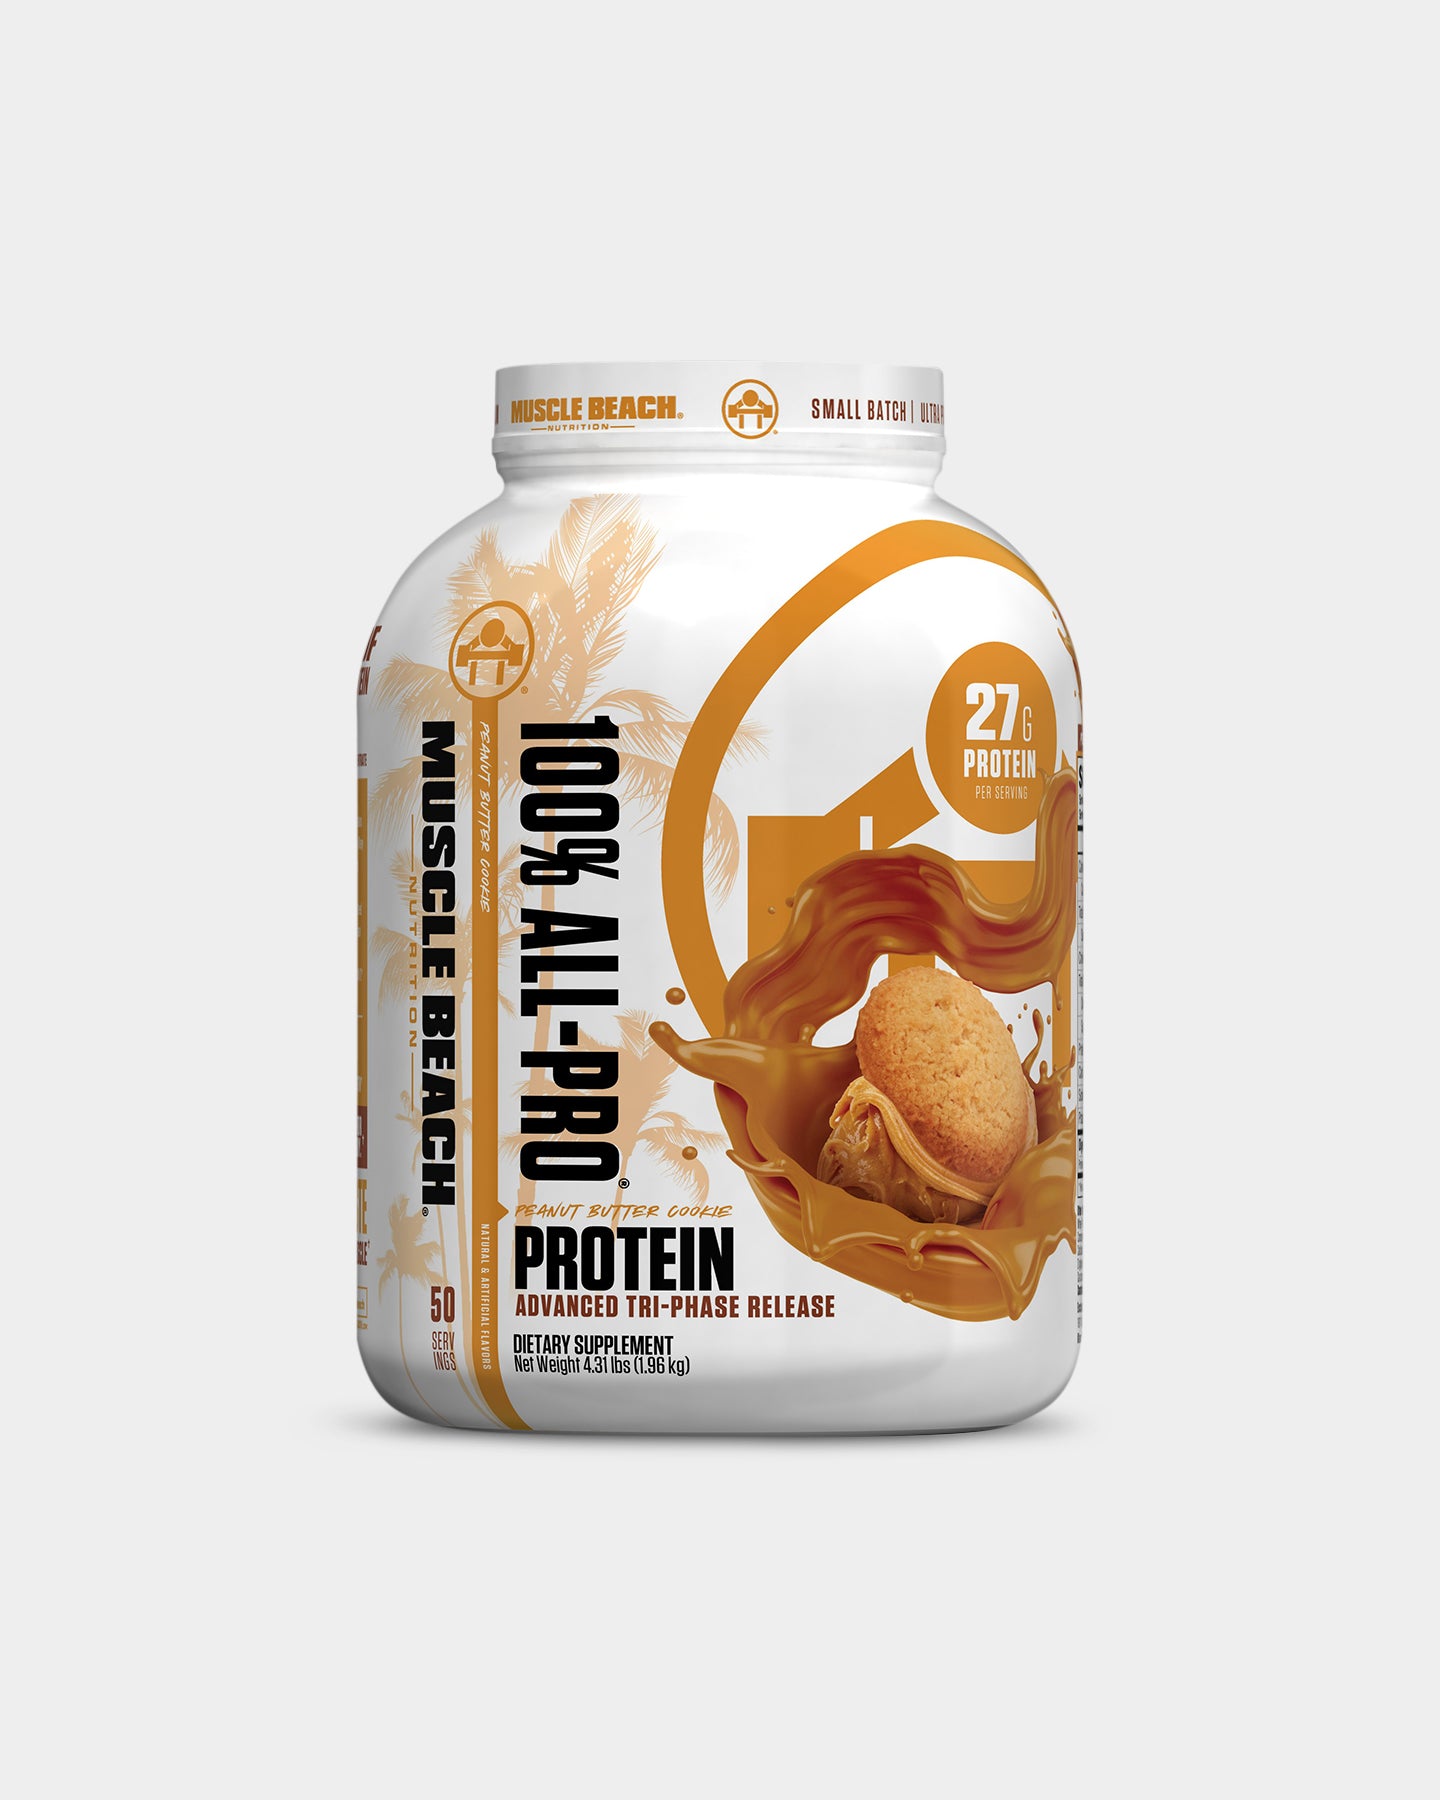 Image of Muscle Beach Nutrition 100% All Pro Protein Powder